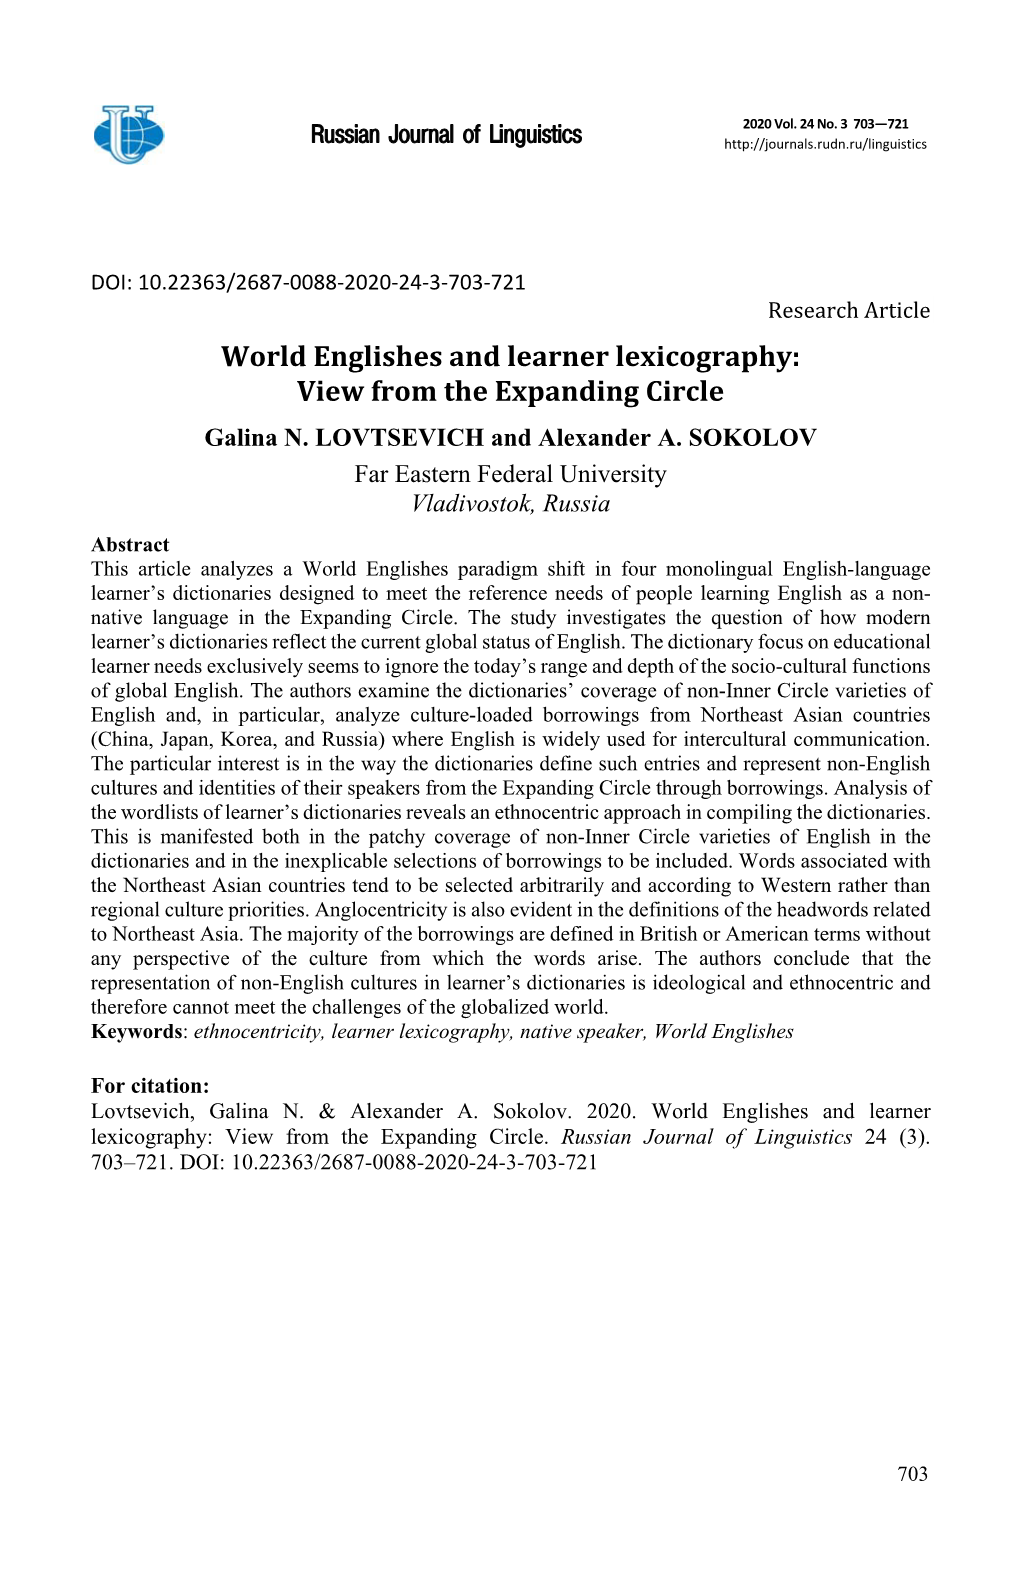 World Englishes and Learner Lexicography: View from the Expanding Circle Galina N